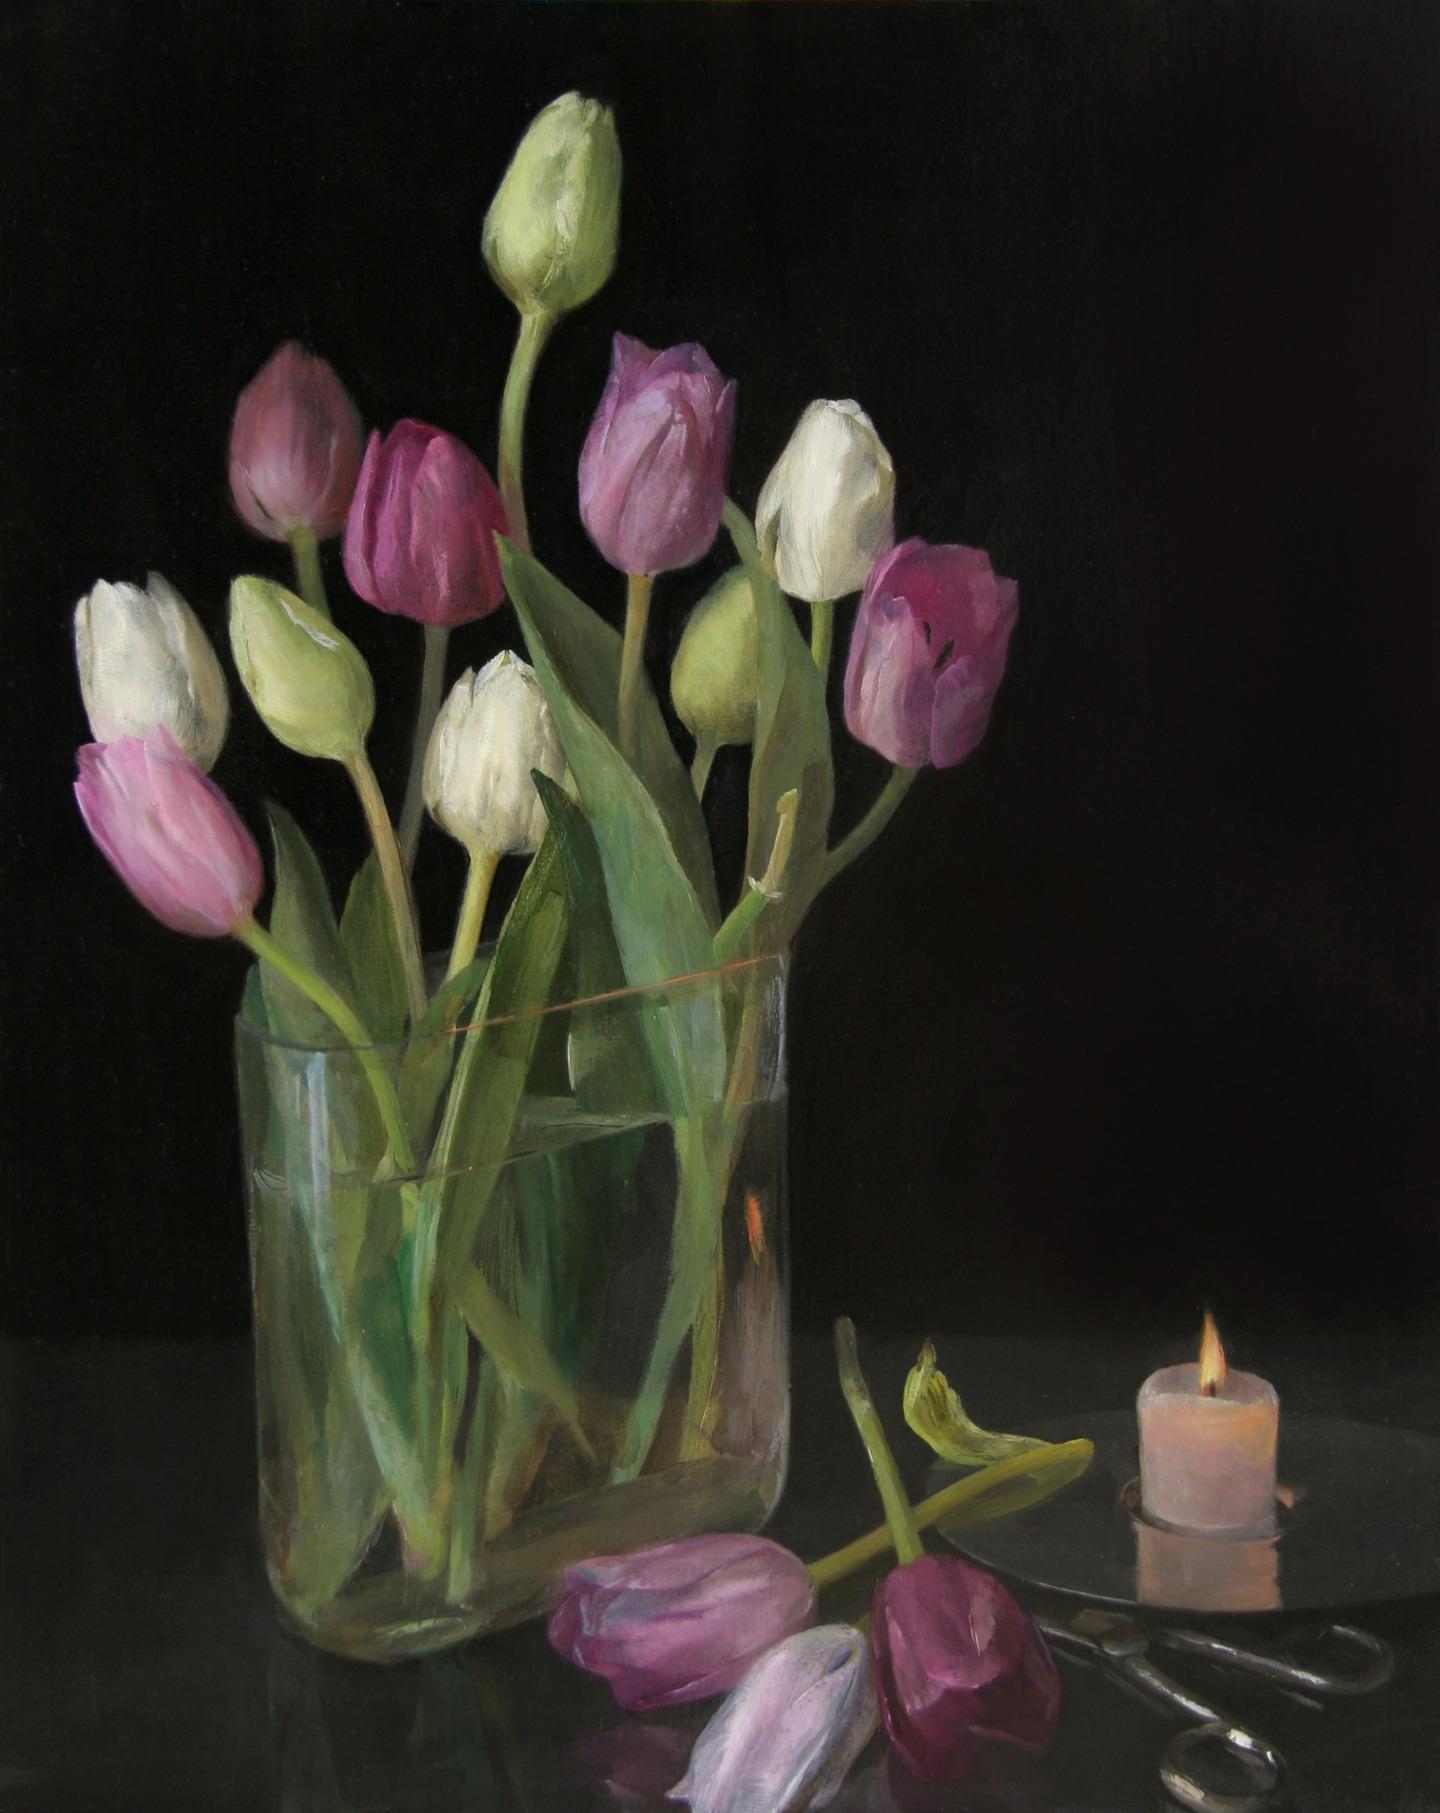 Still Life with Tulips, Glass Vase of Pastel Tulips, Scissors & Burning Candle